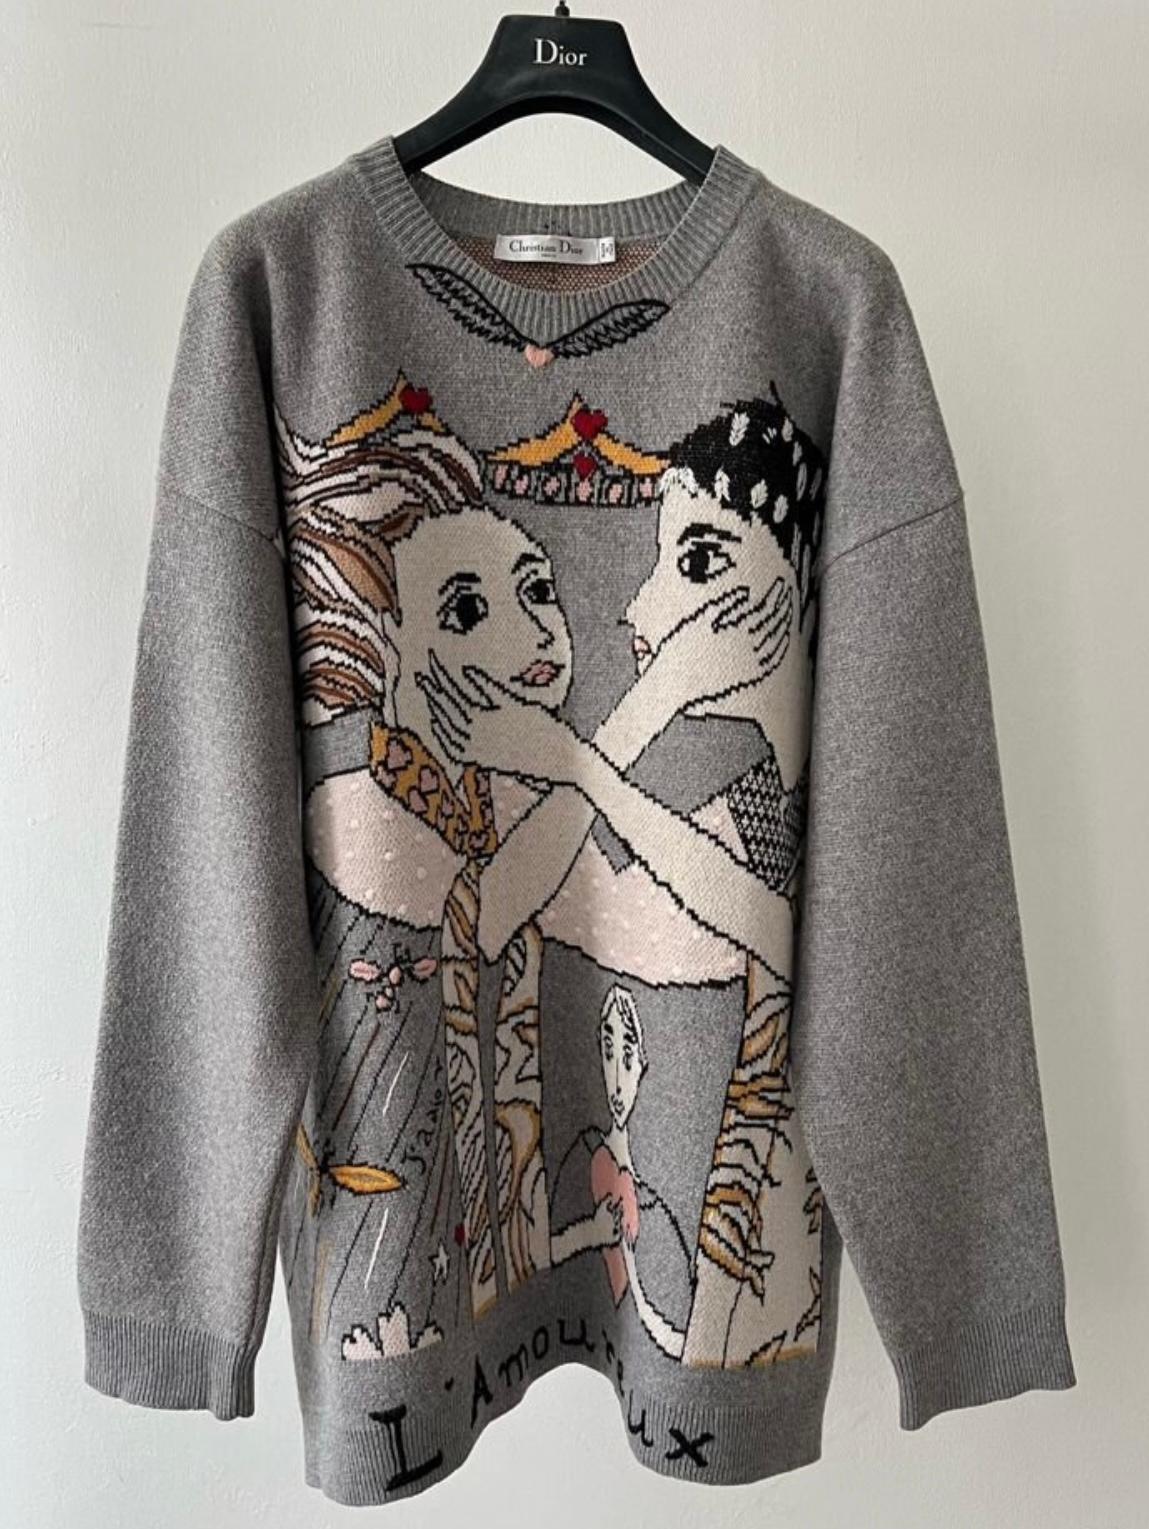 Dior Tarot Embroidery Cashmere jumper In Excellent Condition For Sale In Dubai, AE